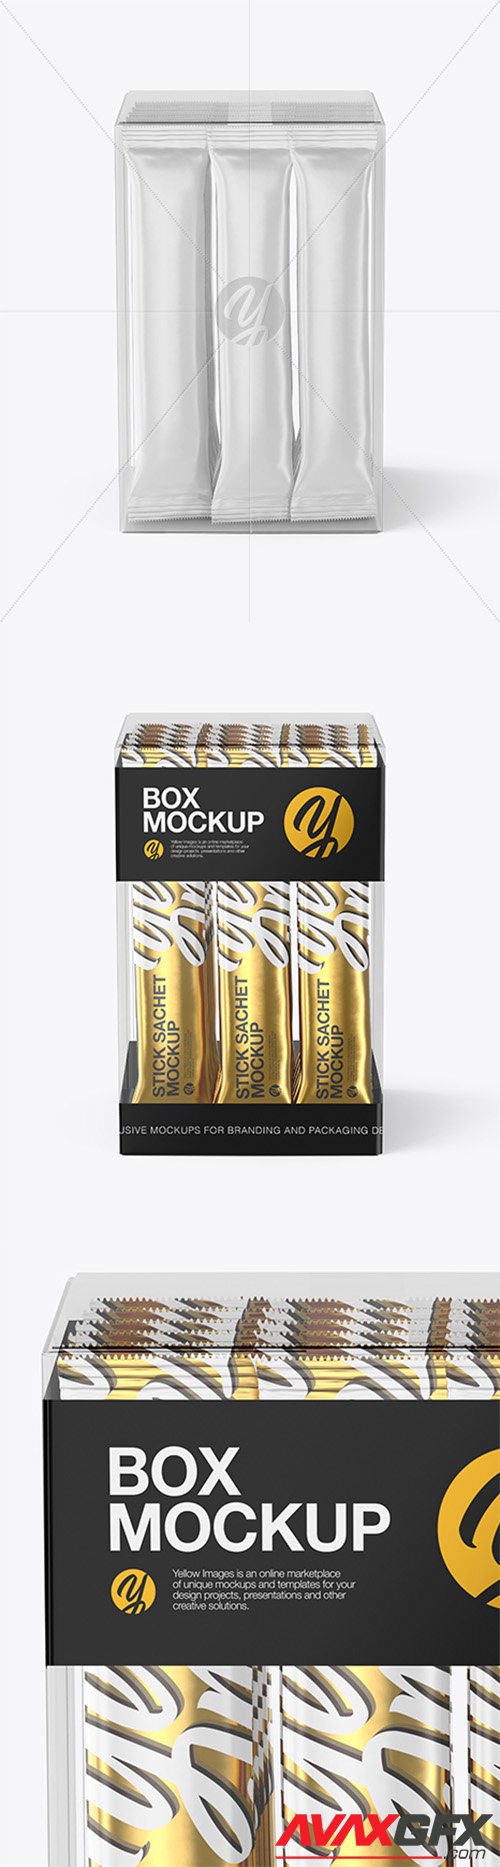 Download 25 Opened Box 20 Matte Sachets Front View Psd Mockup Psd Yellowimages Mockups